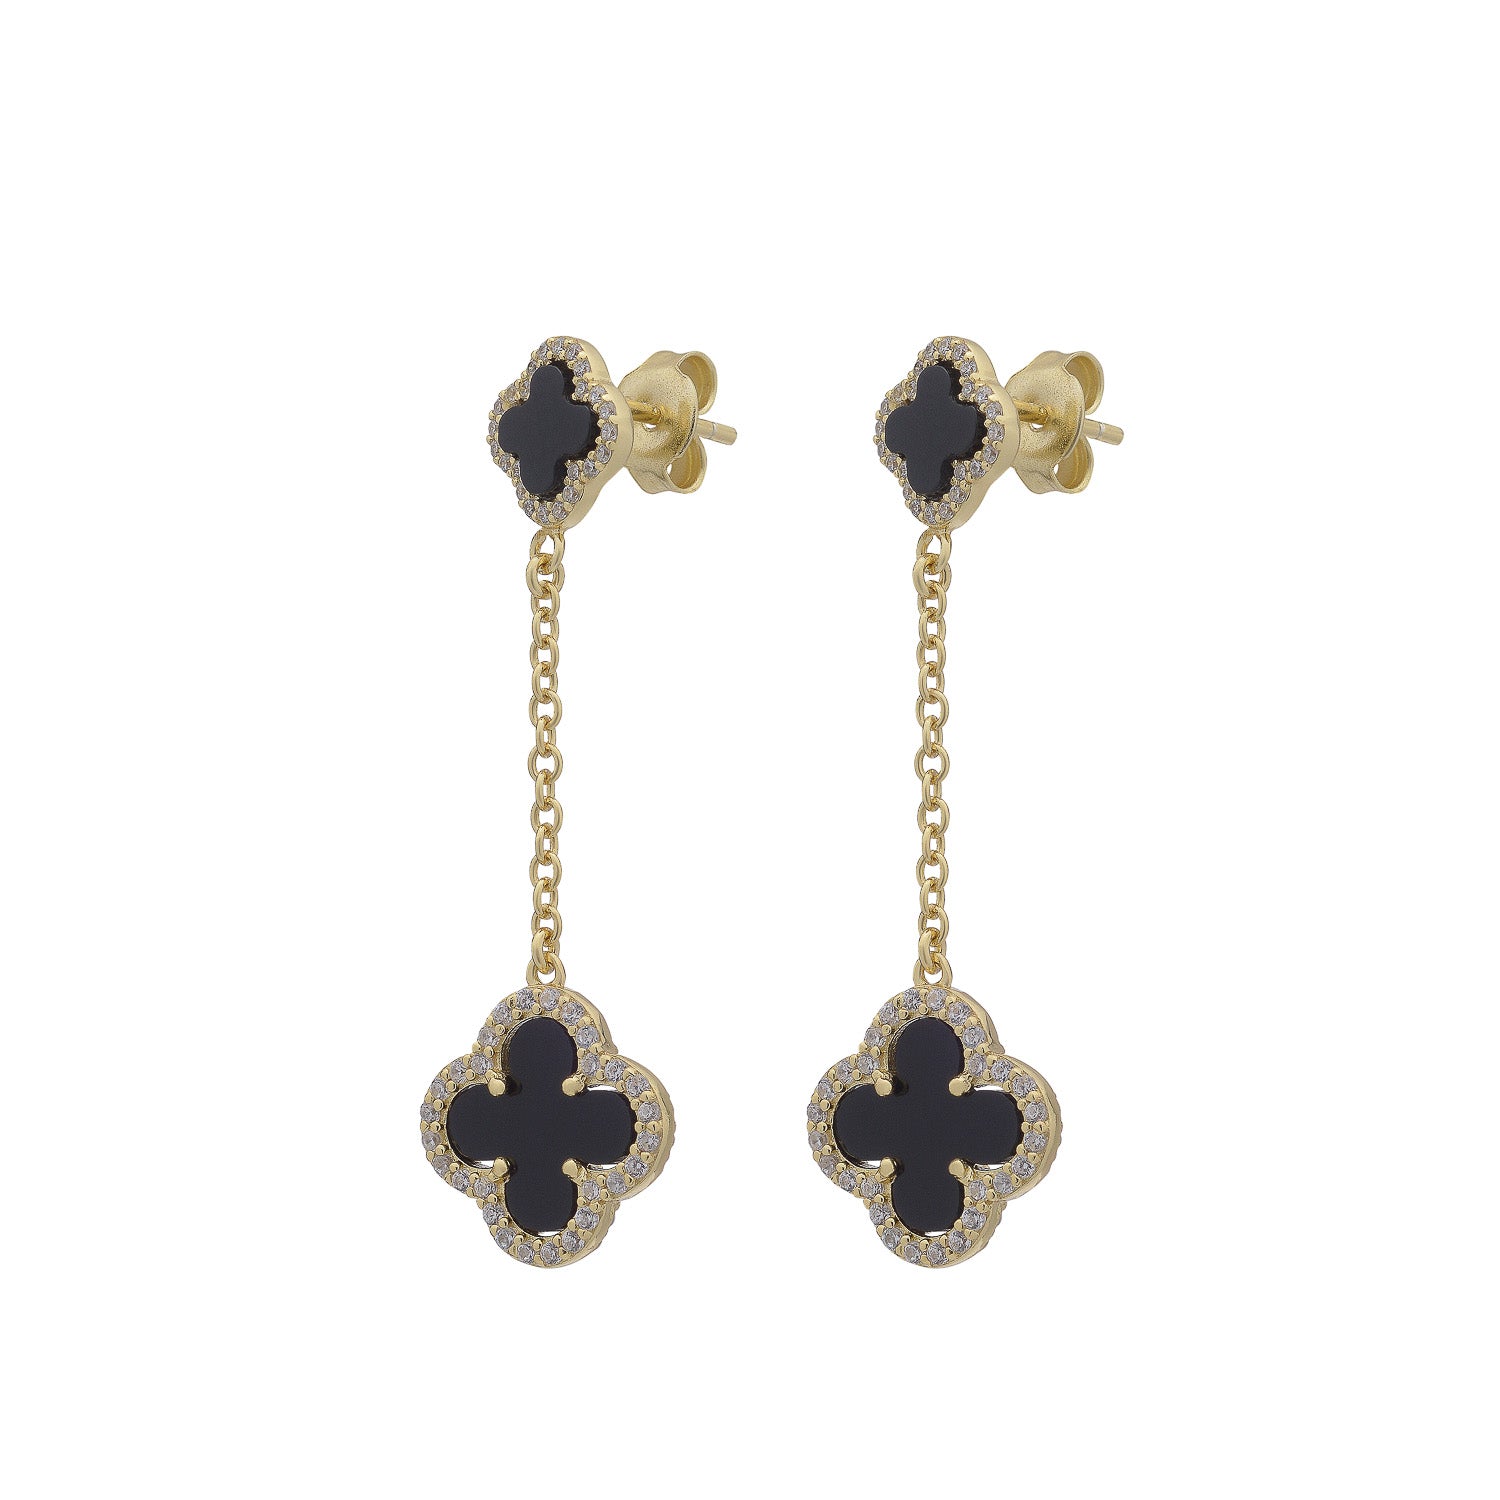 Clover Stud Drop Earrings with Black Onyx and Cubic Zirconia (Gold)